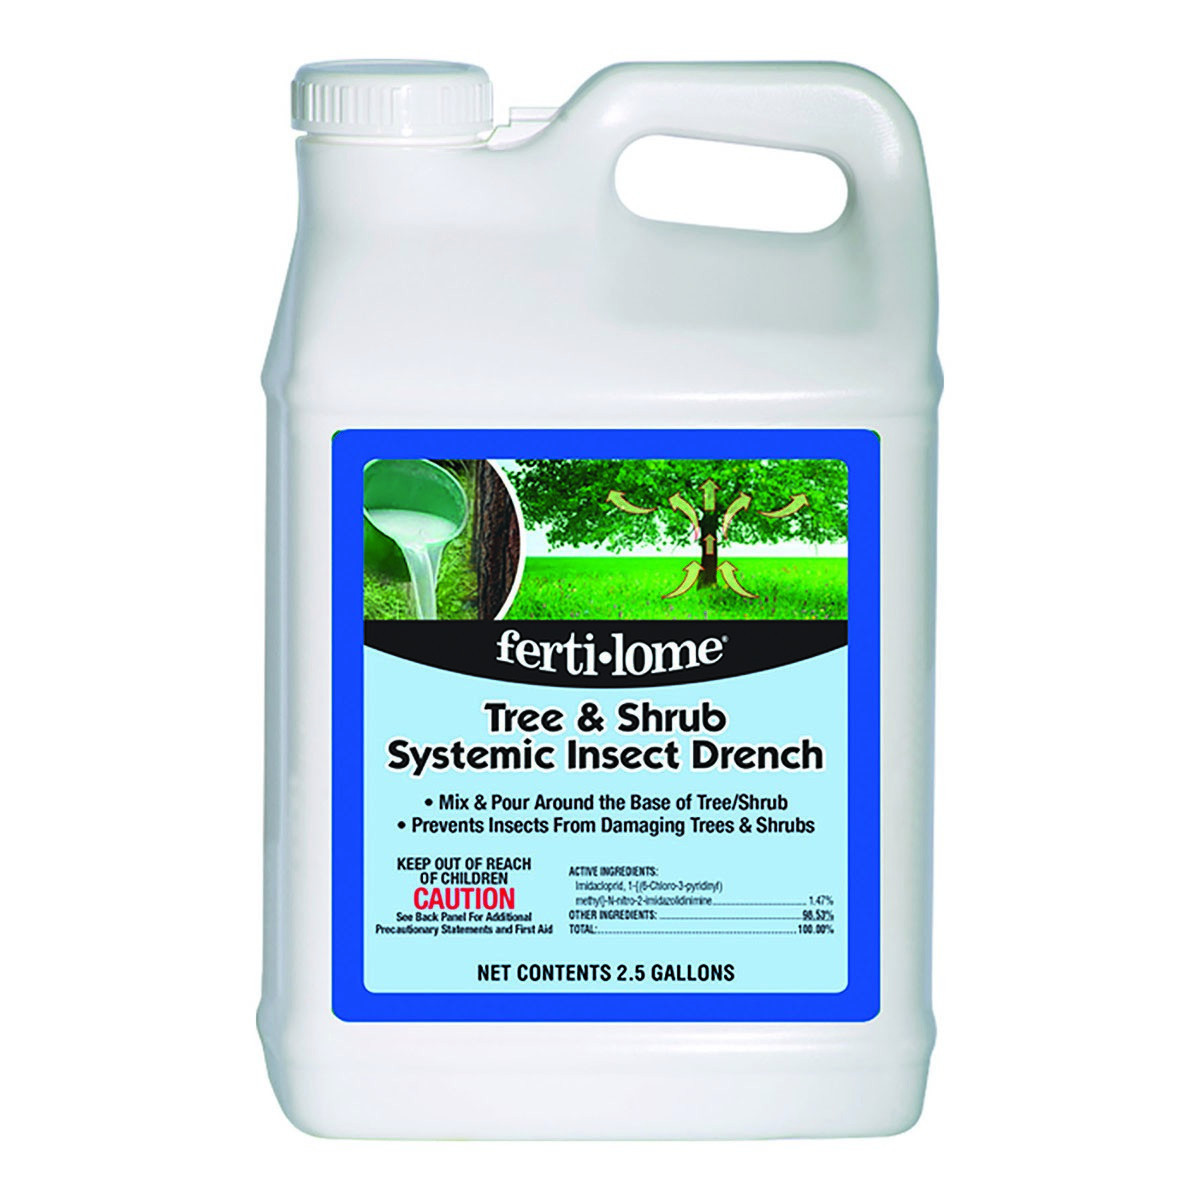 Fertilome 400208 2.5 gal Tree & Shrub Systemic Insect Drench